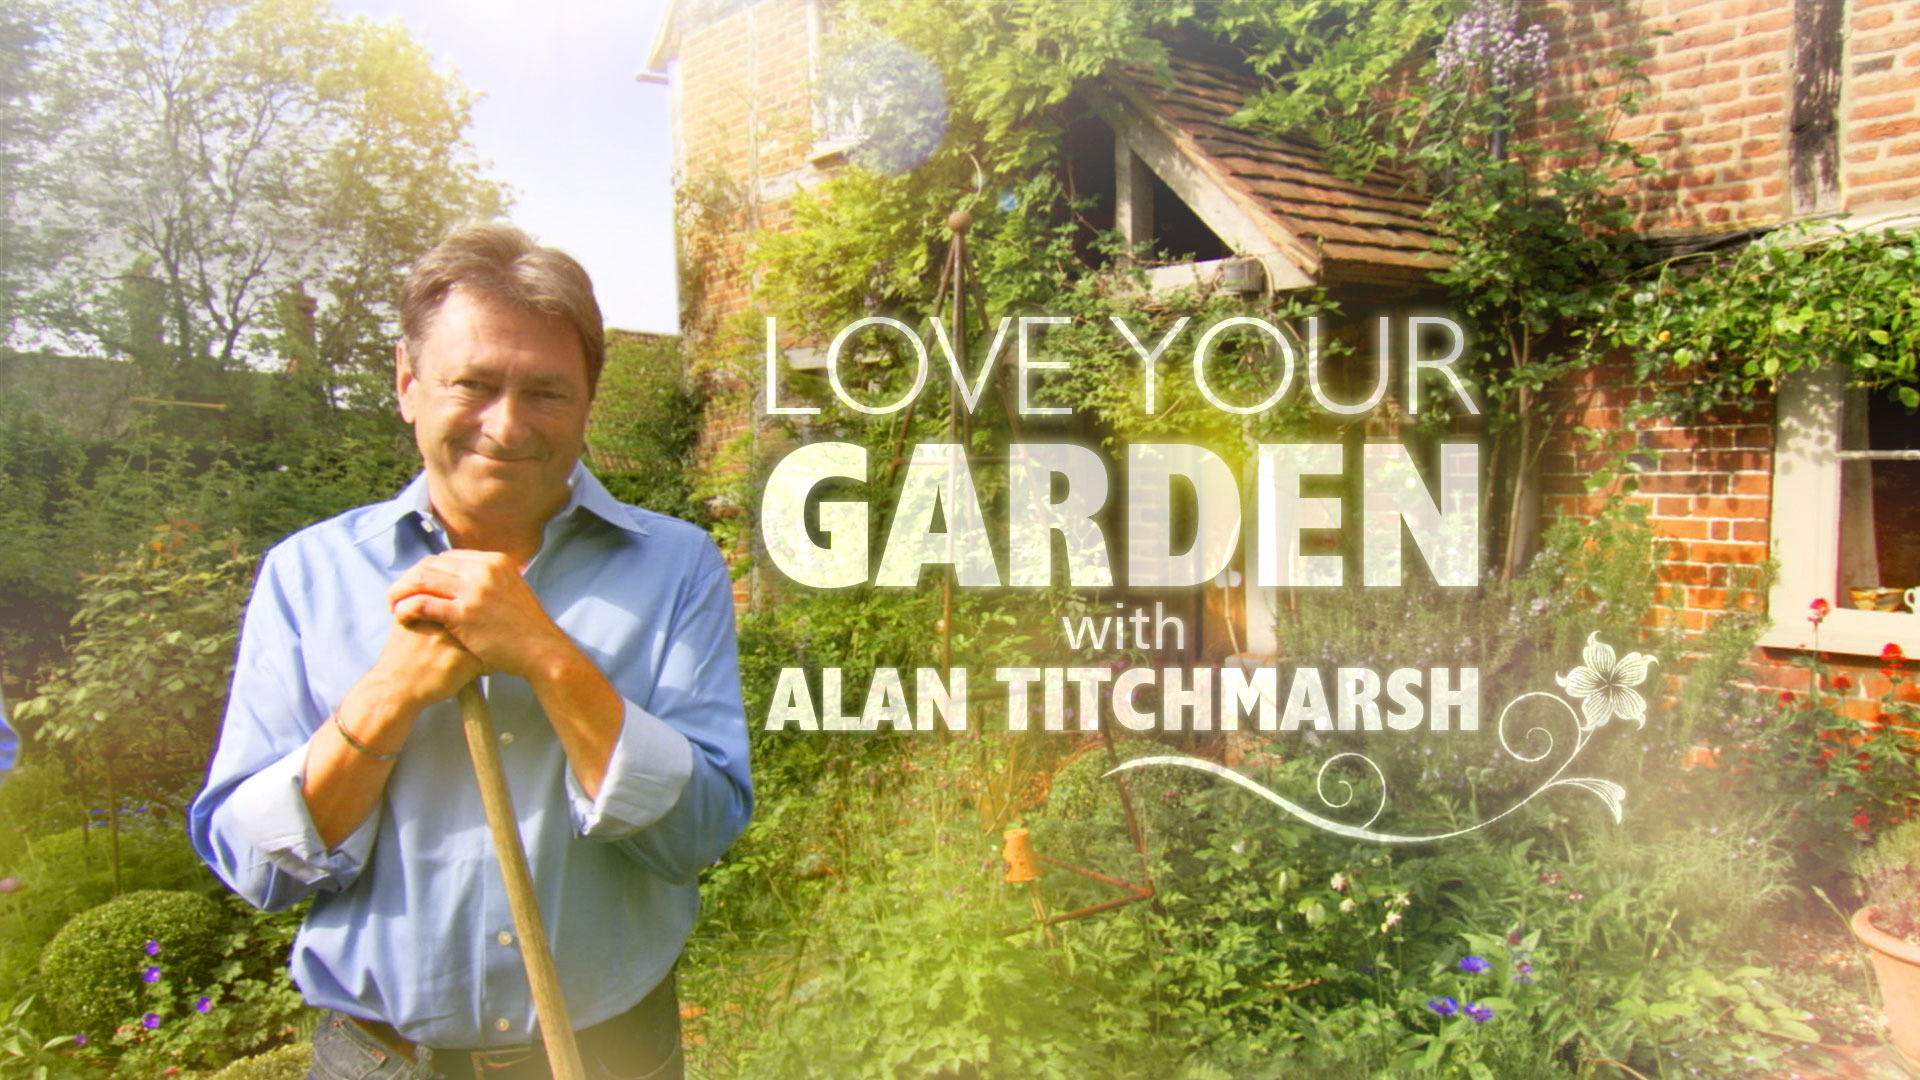 Show Love Your Garden with Alan Titchmarsh